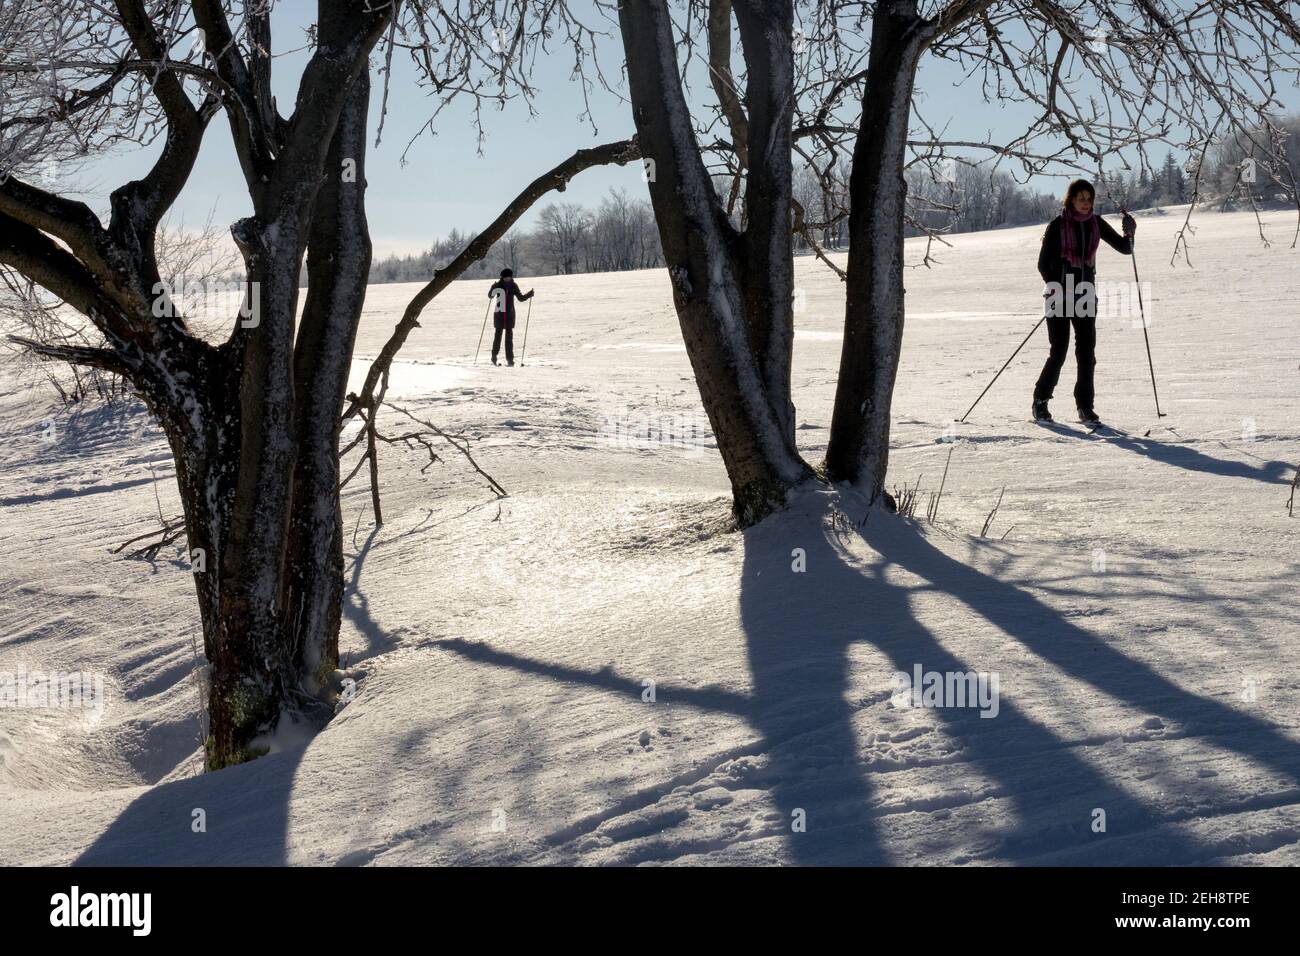 Shadows of tree in snowy winter scenery with two skiers, cross country skiing Stock Photo